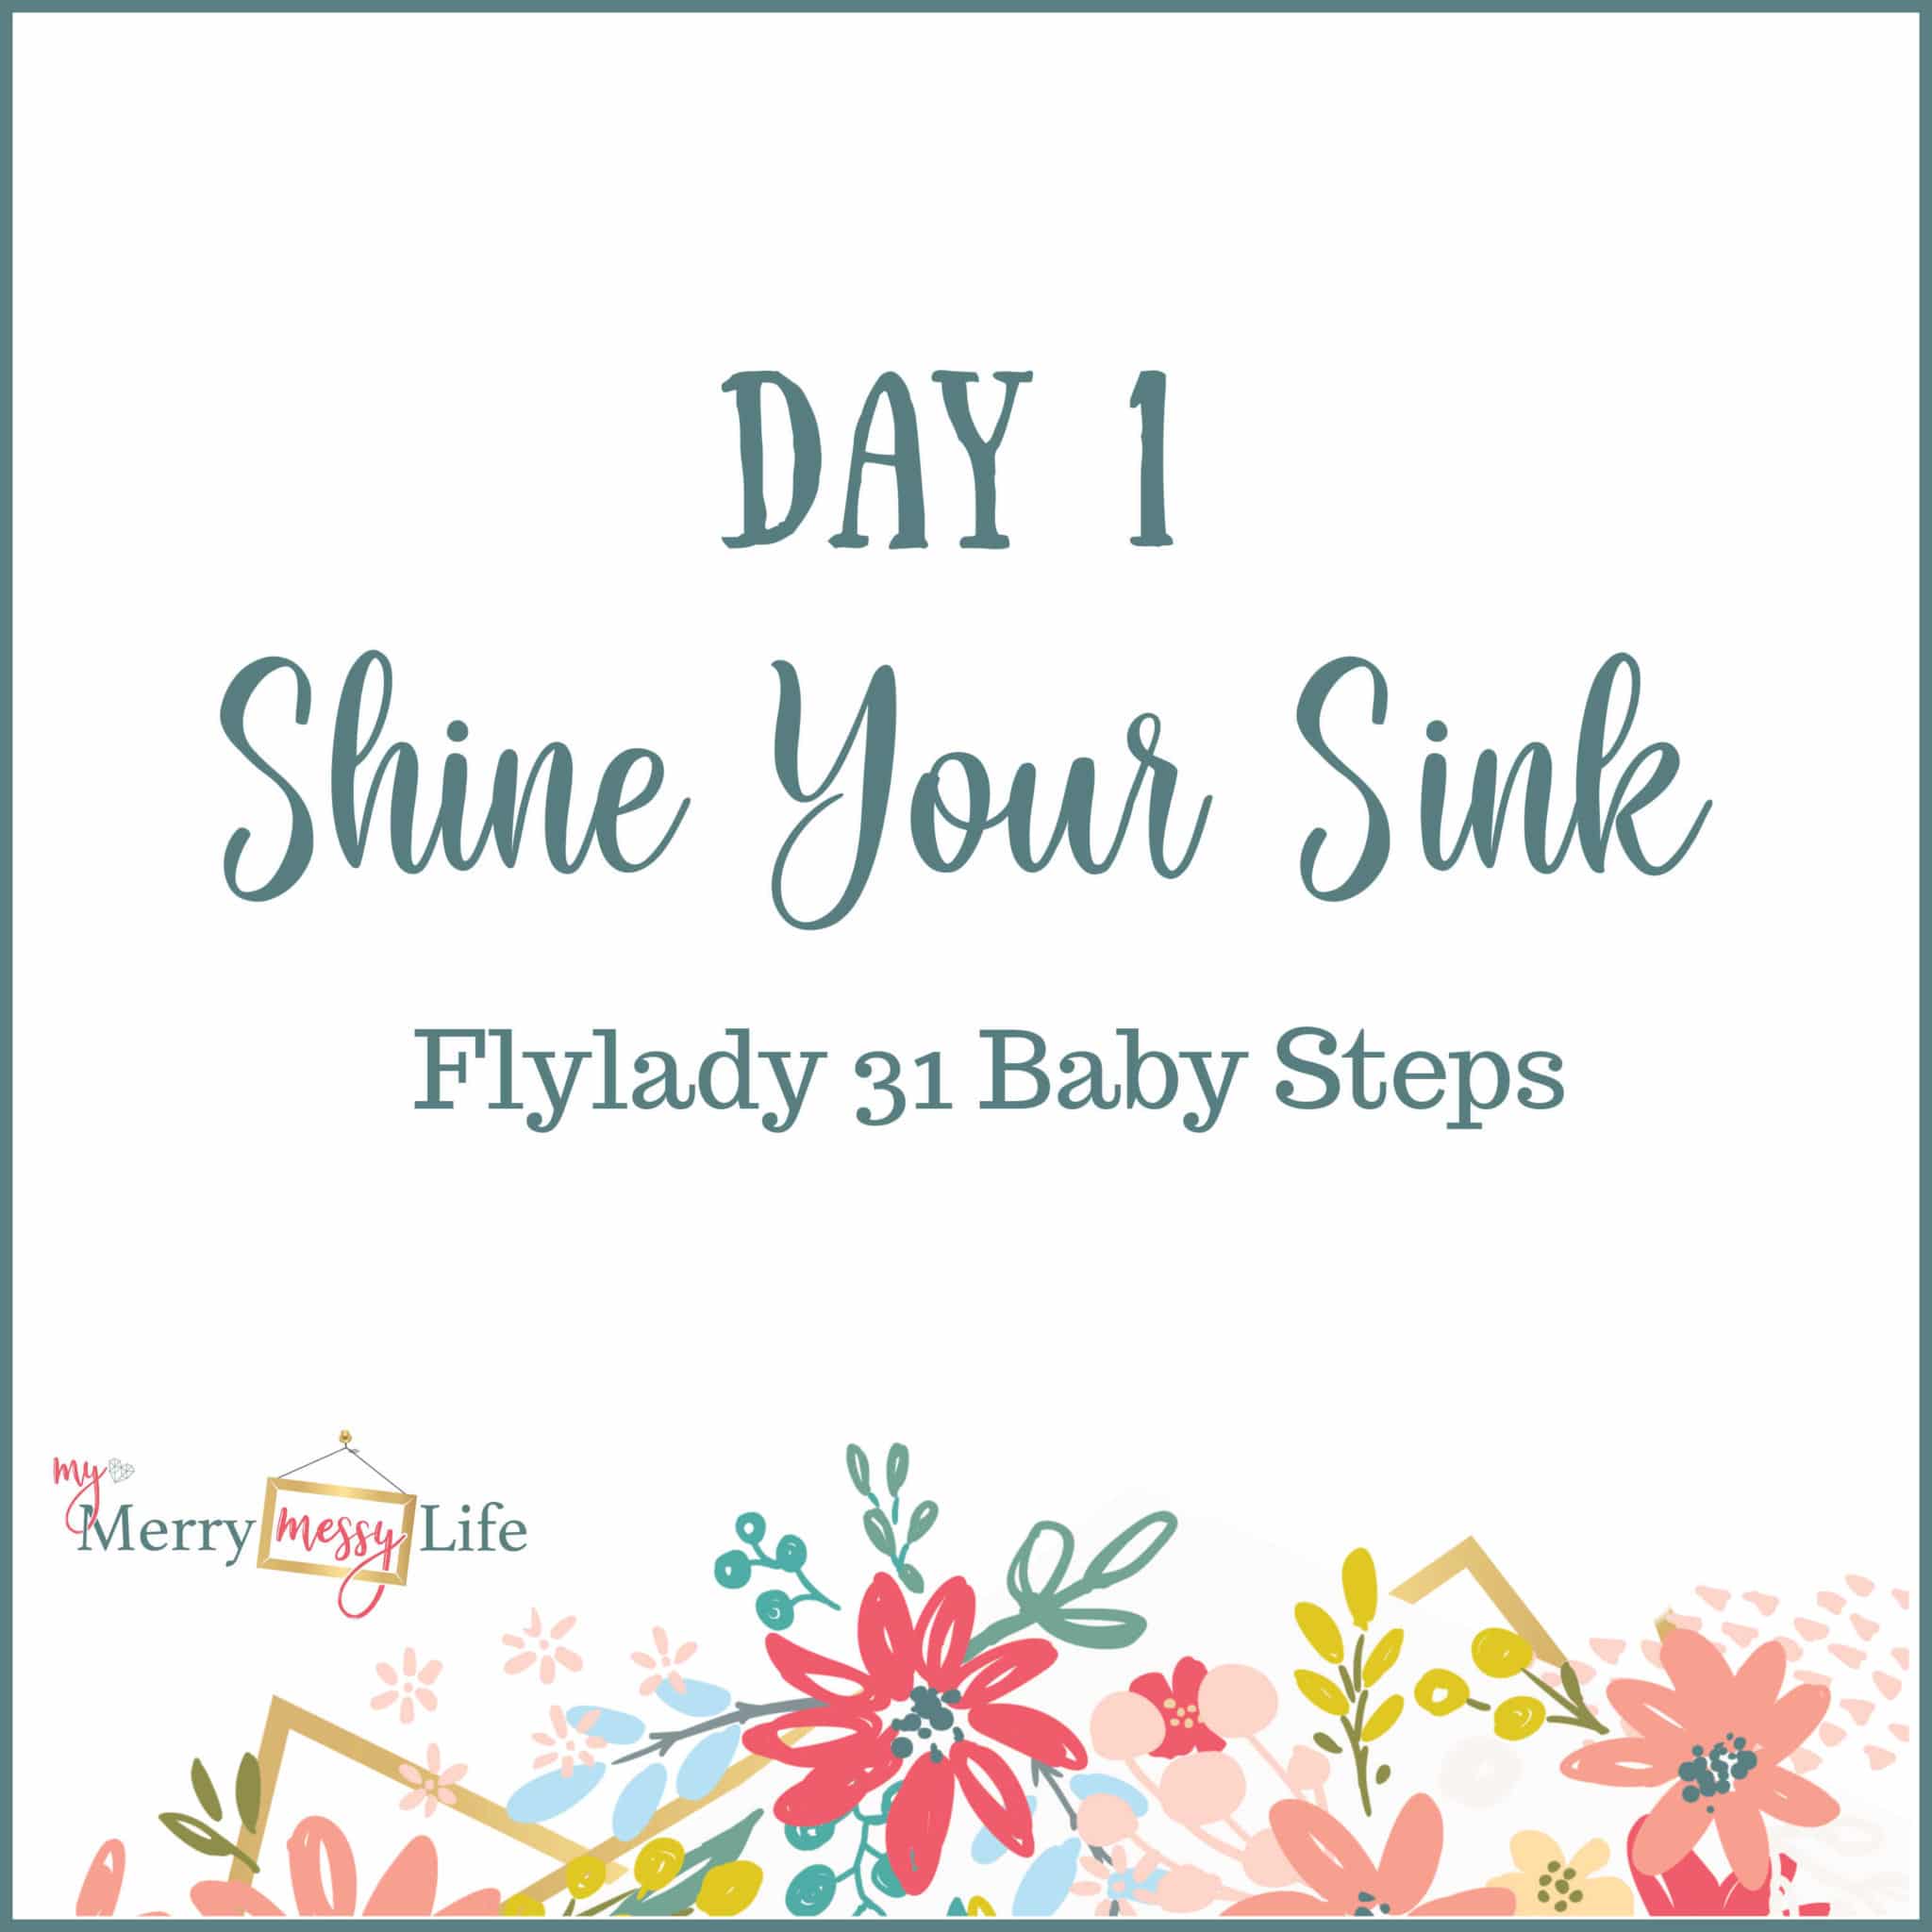 Flylady 31 Baby Steps - Day 1 - Shine Your Sink!